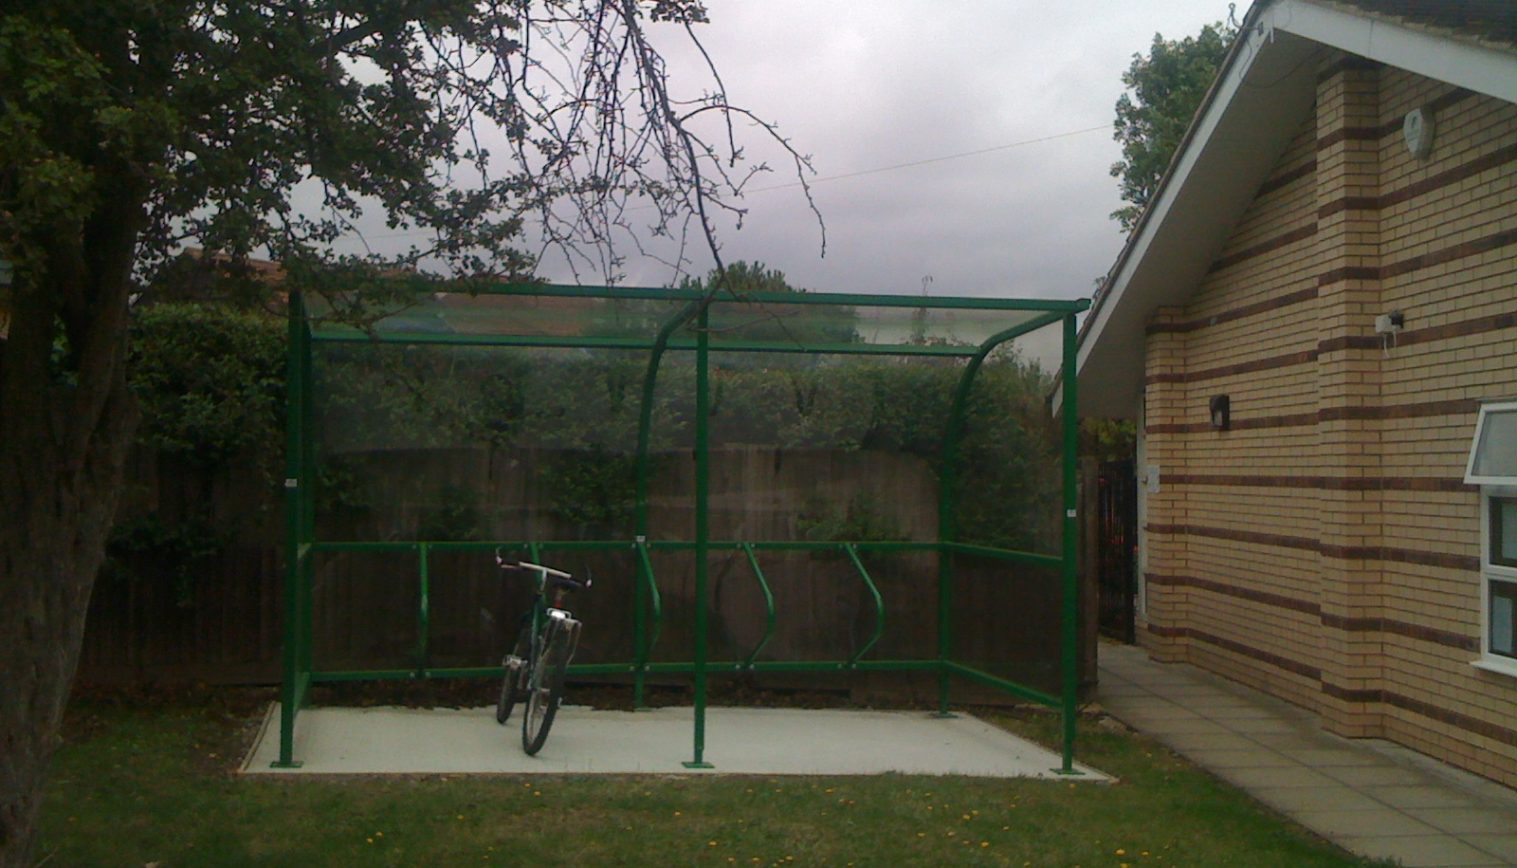 Larchwood Primary School – Cycle Shelter